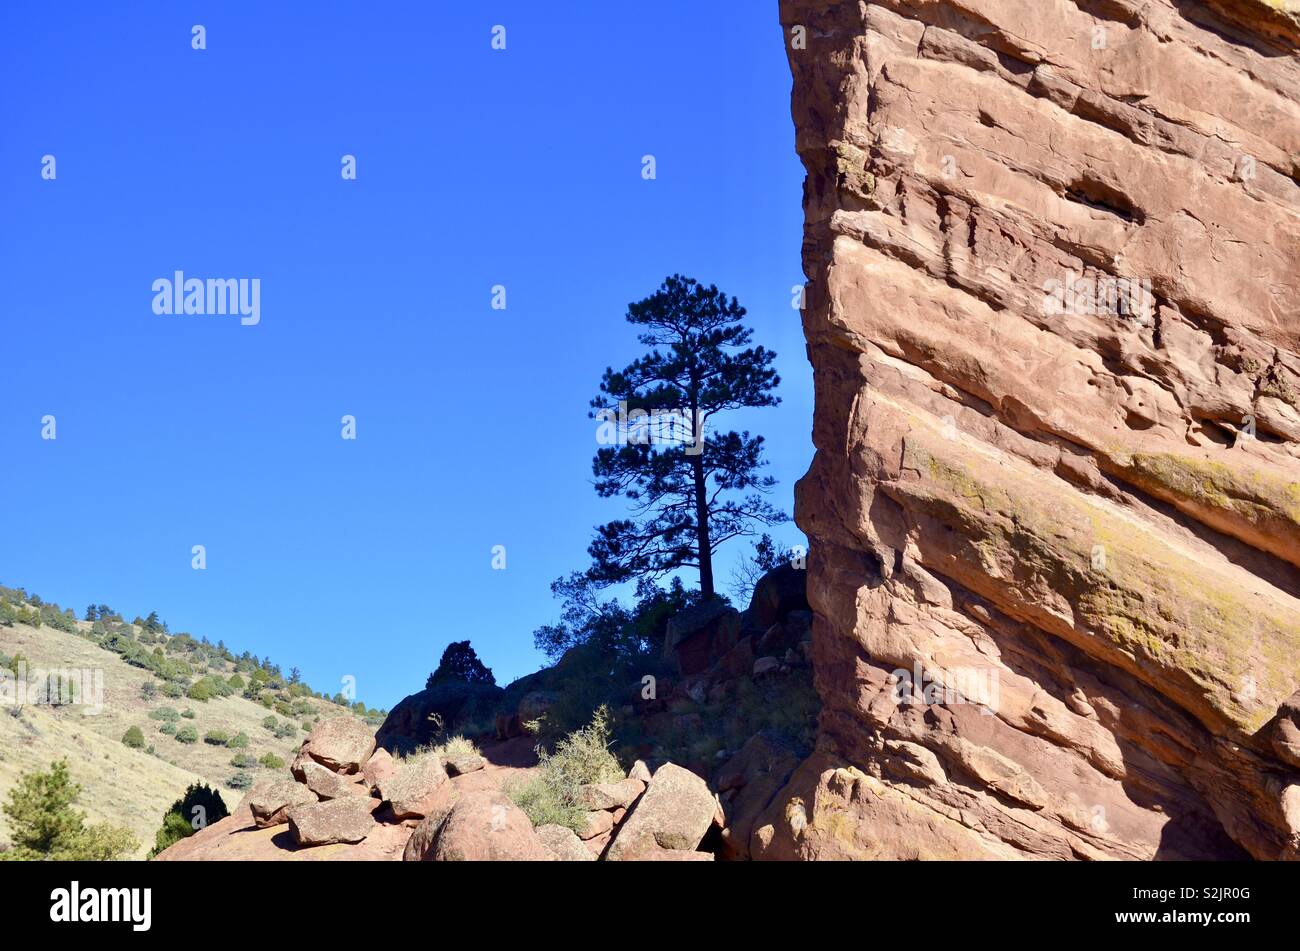 Pine tree growing by a cliff face Stock Photo